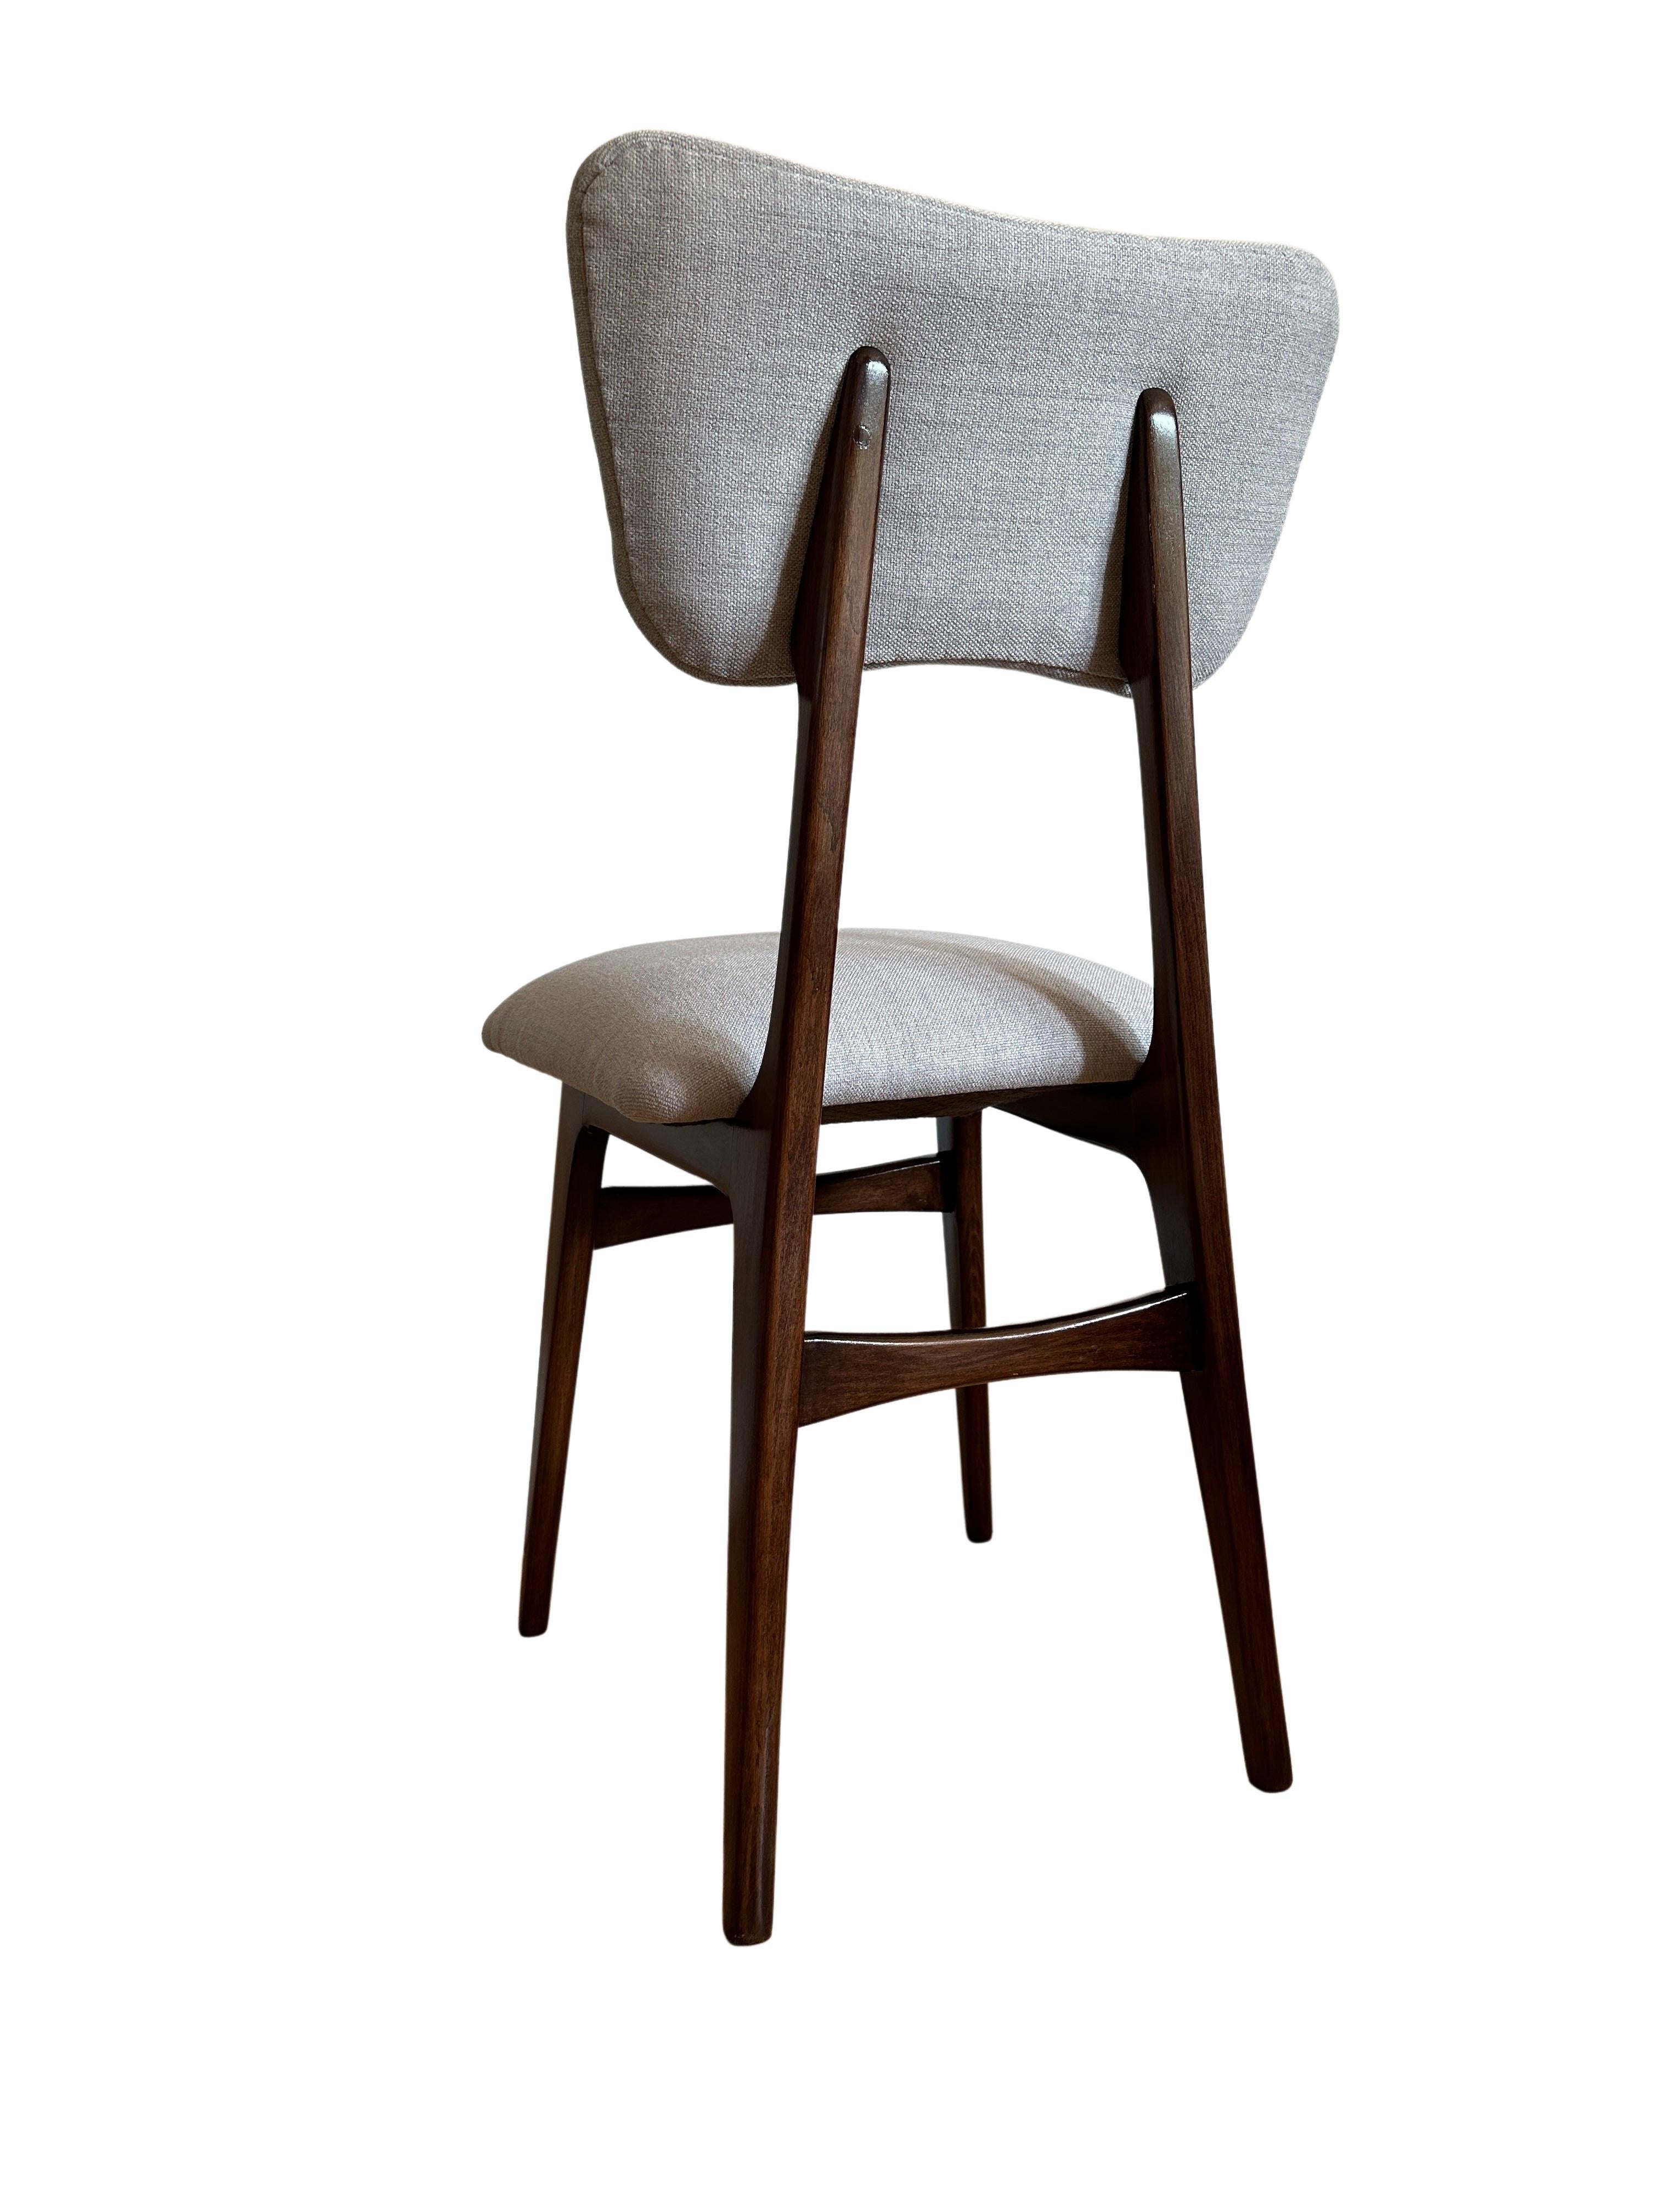 Set of 6 Midcentury Beige and Grey Dining Chairs, Europe, 1960s For Sale 10